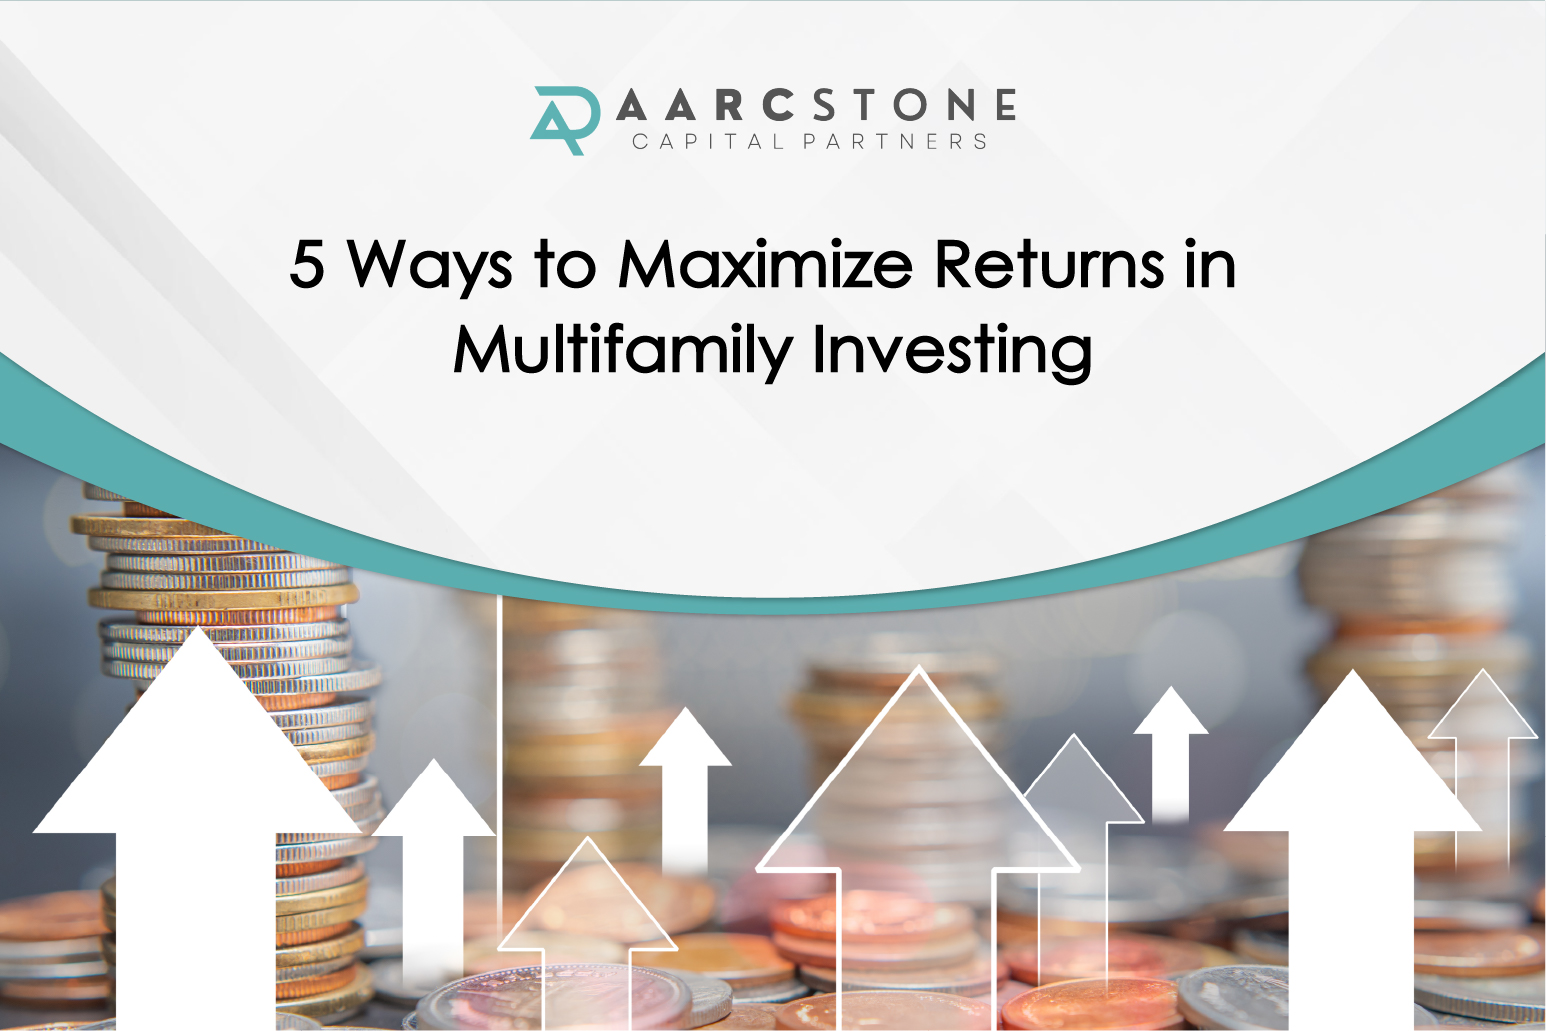 5 Ways to Maximize Returns in Multifamily Investing